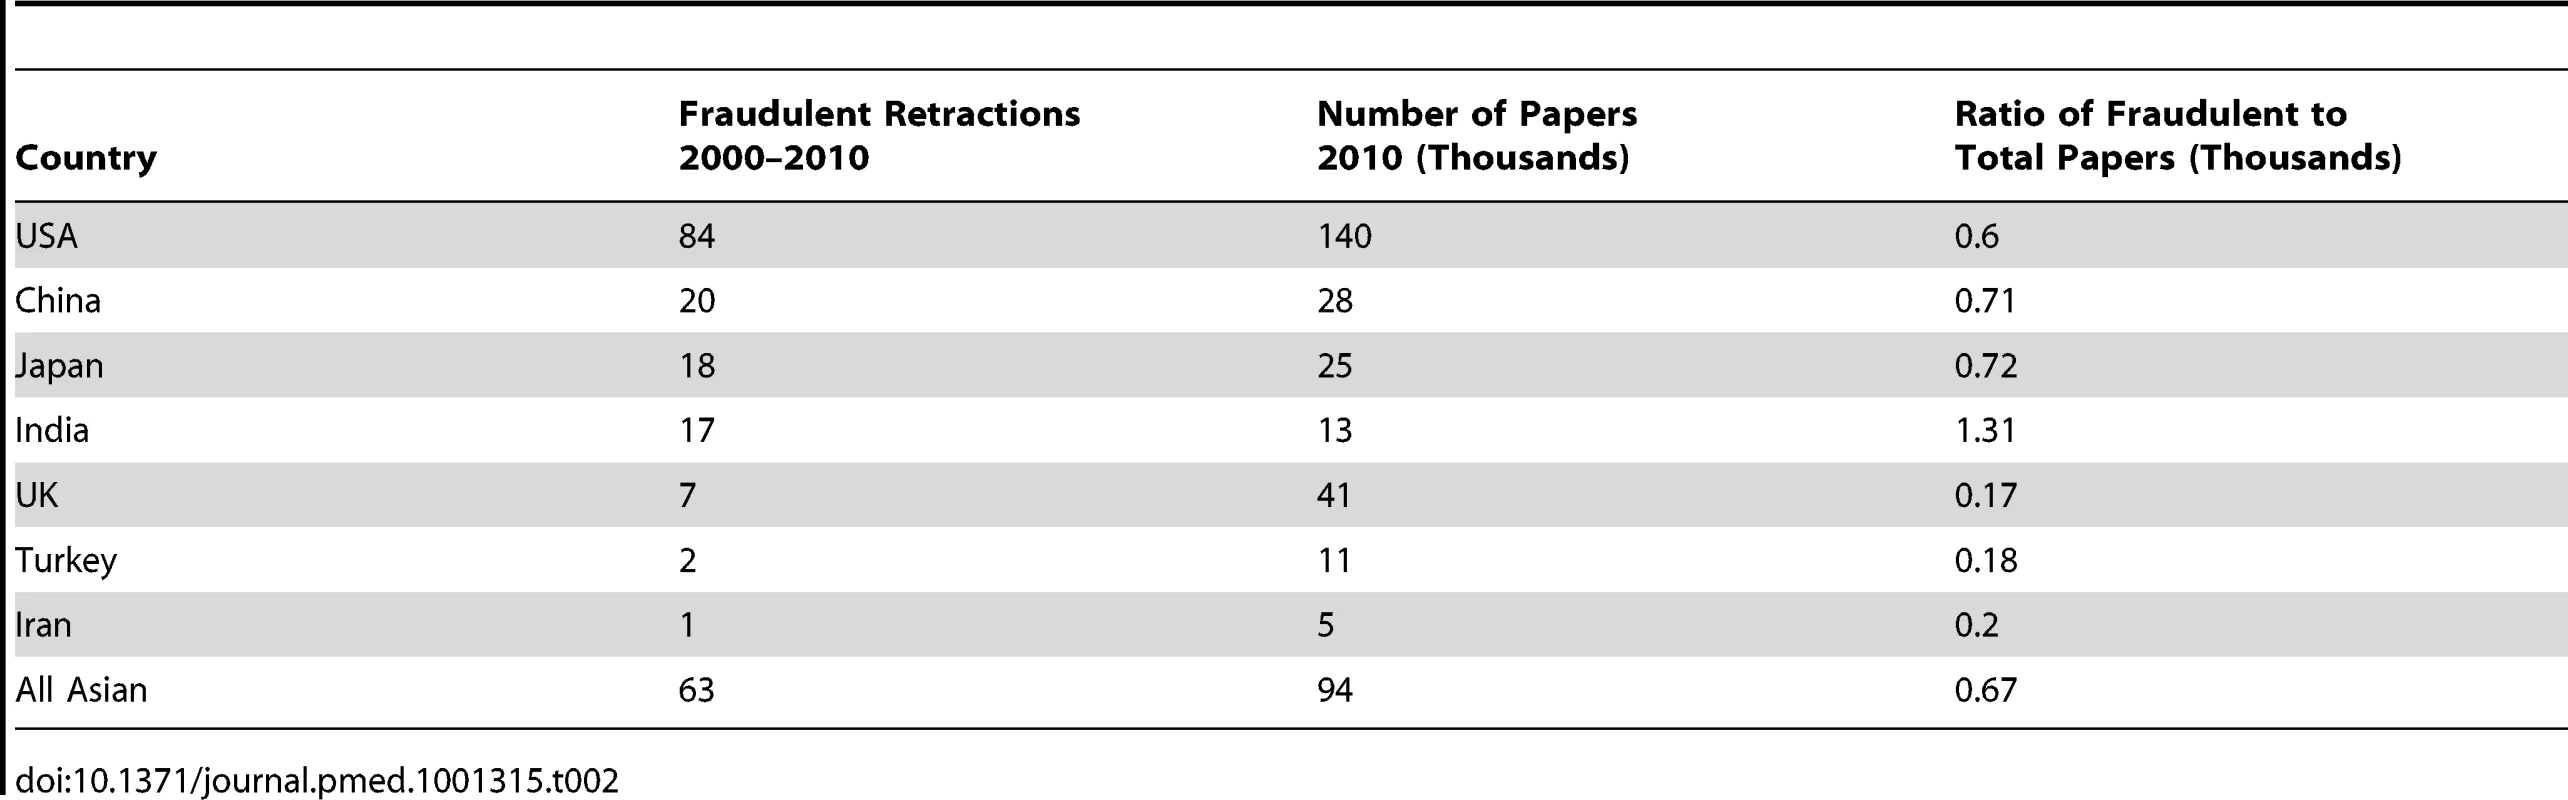 Ratio of retractions for fraud to total number of papers published for selected countries.